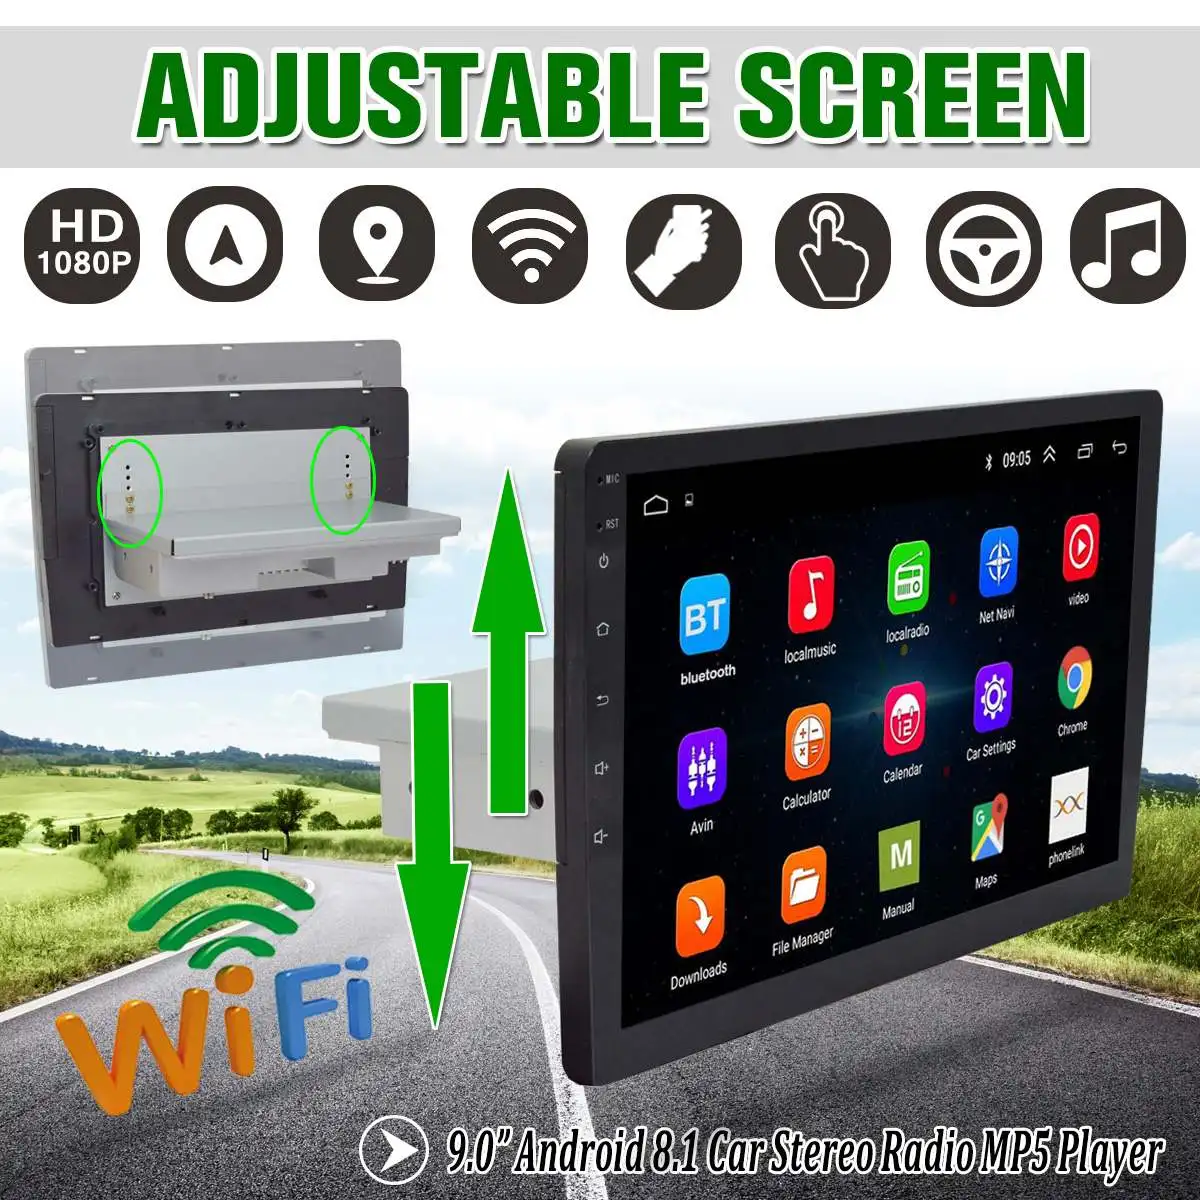 

Android 8.1 1 DIN Adjustable Car Radio Stereo With Touch Screen 1G+16G 9 Inch Car WiFi bluetooth FM Radio GPS Nav Player